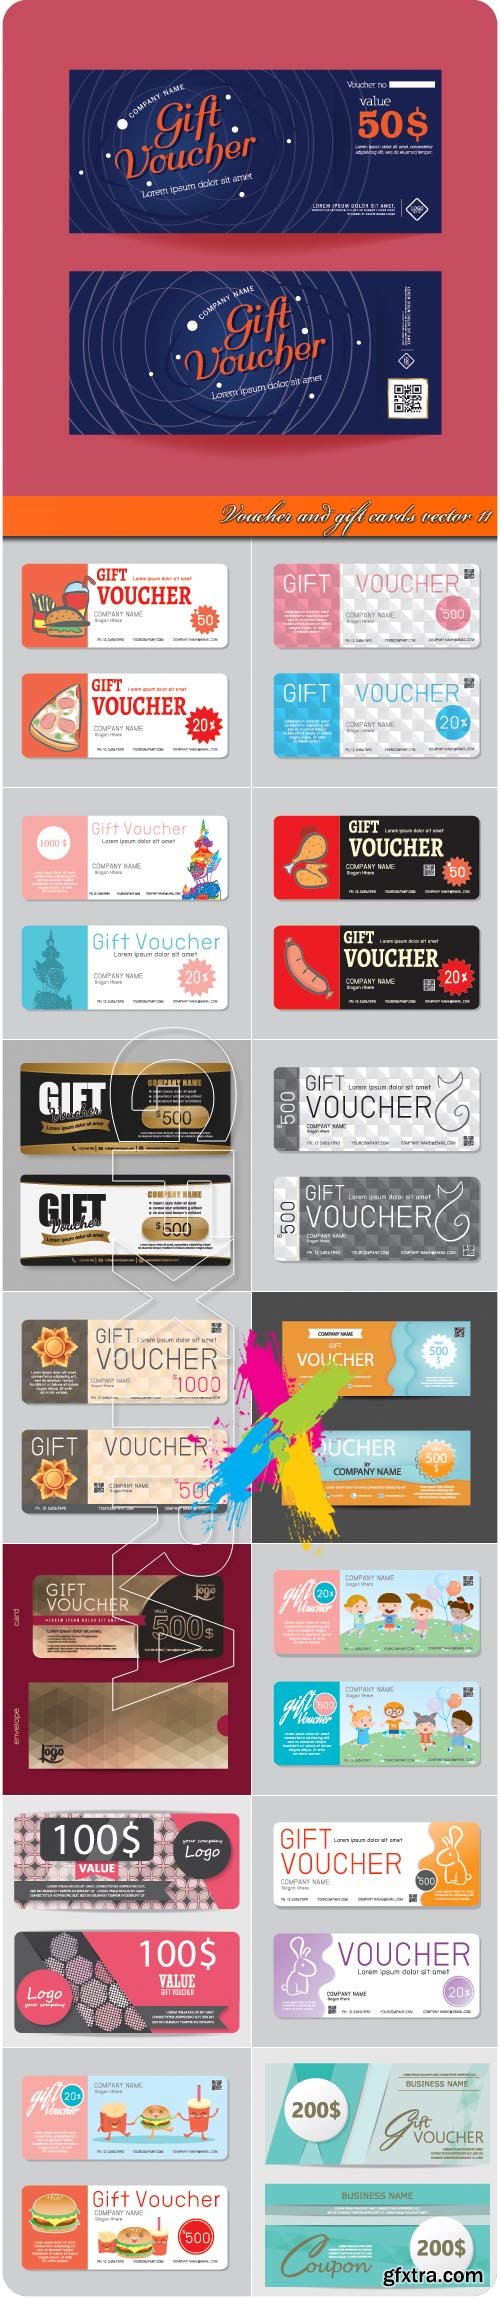 Voucher and gift cards vector 11